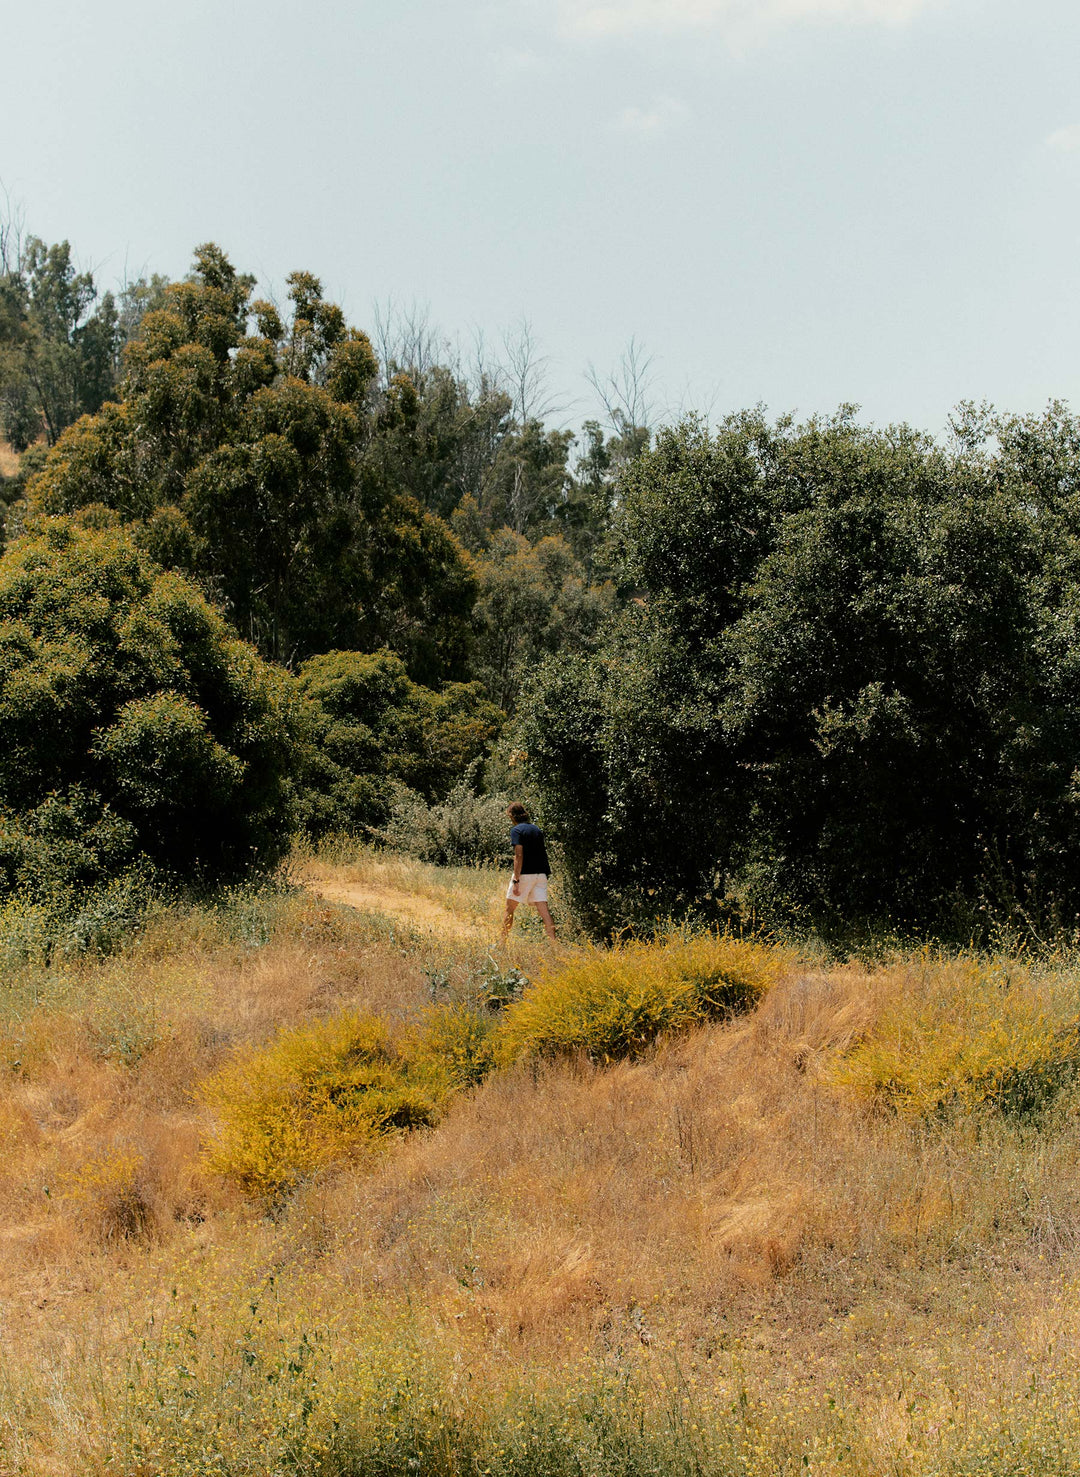 a person walking on a dirt path surrounded by trees